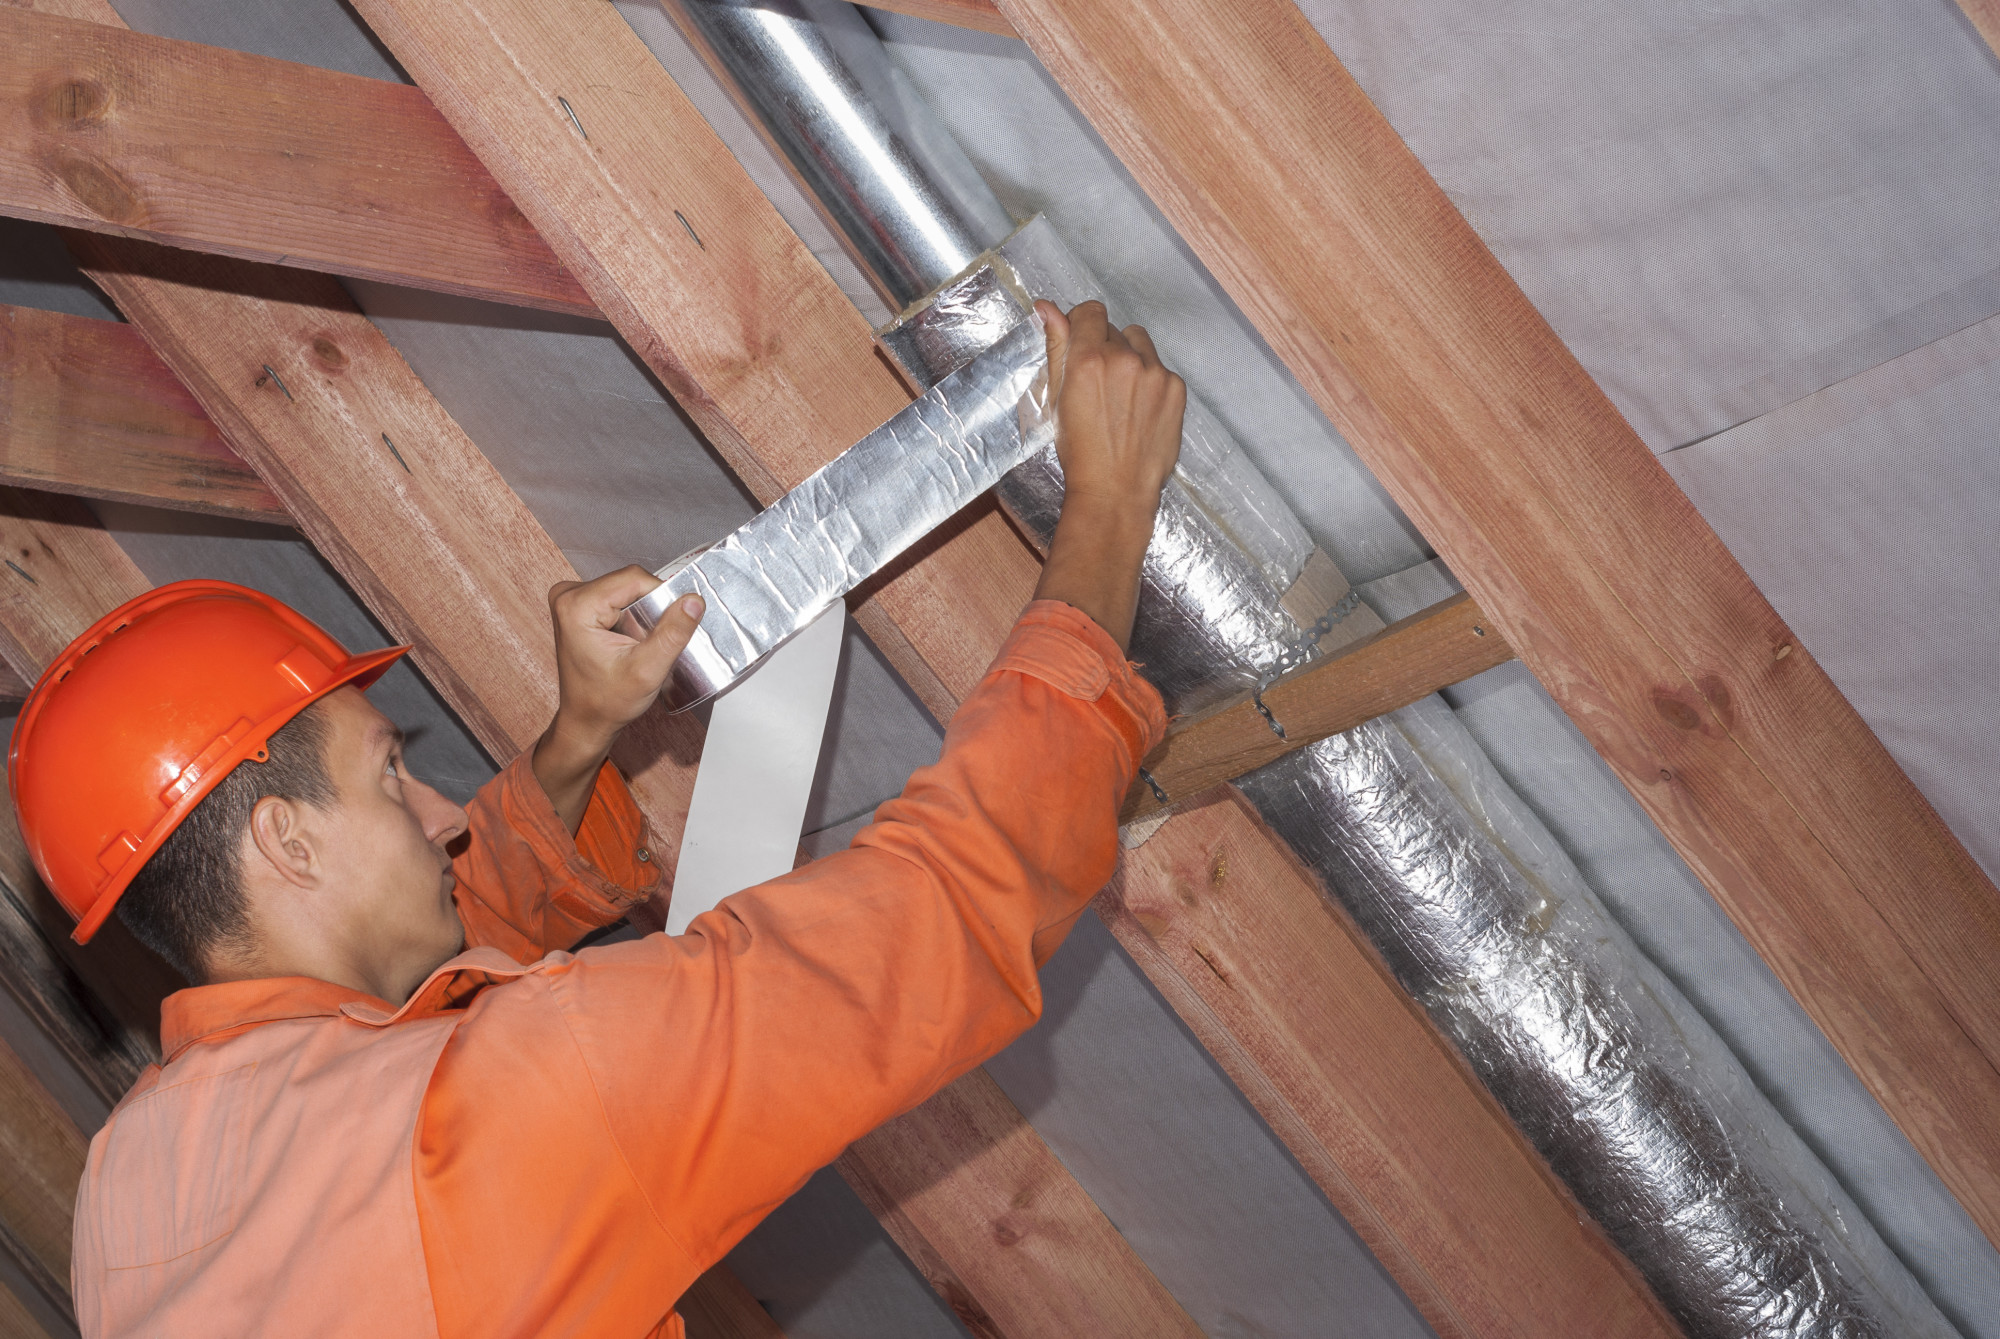 Duct Repair Services for Your Home